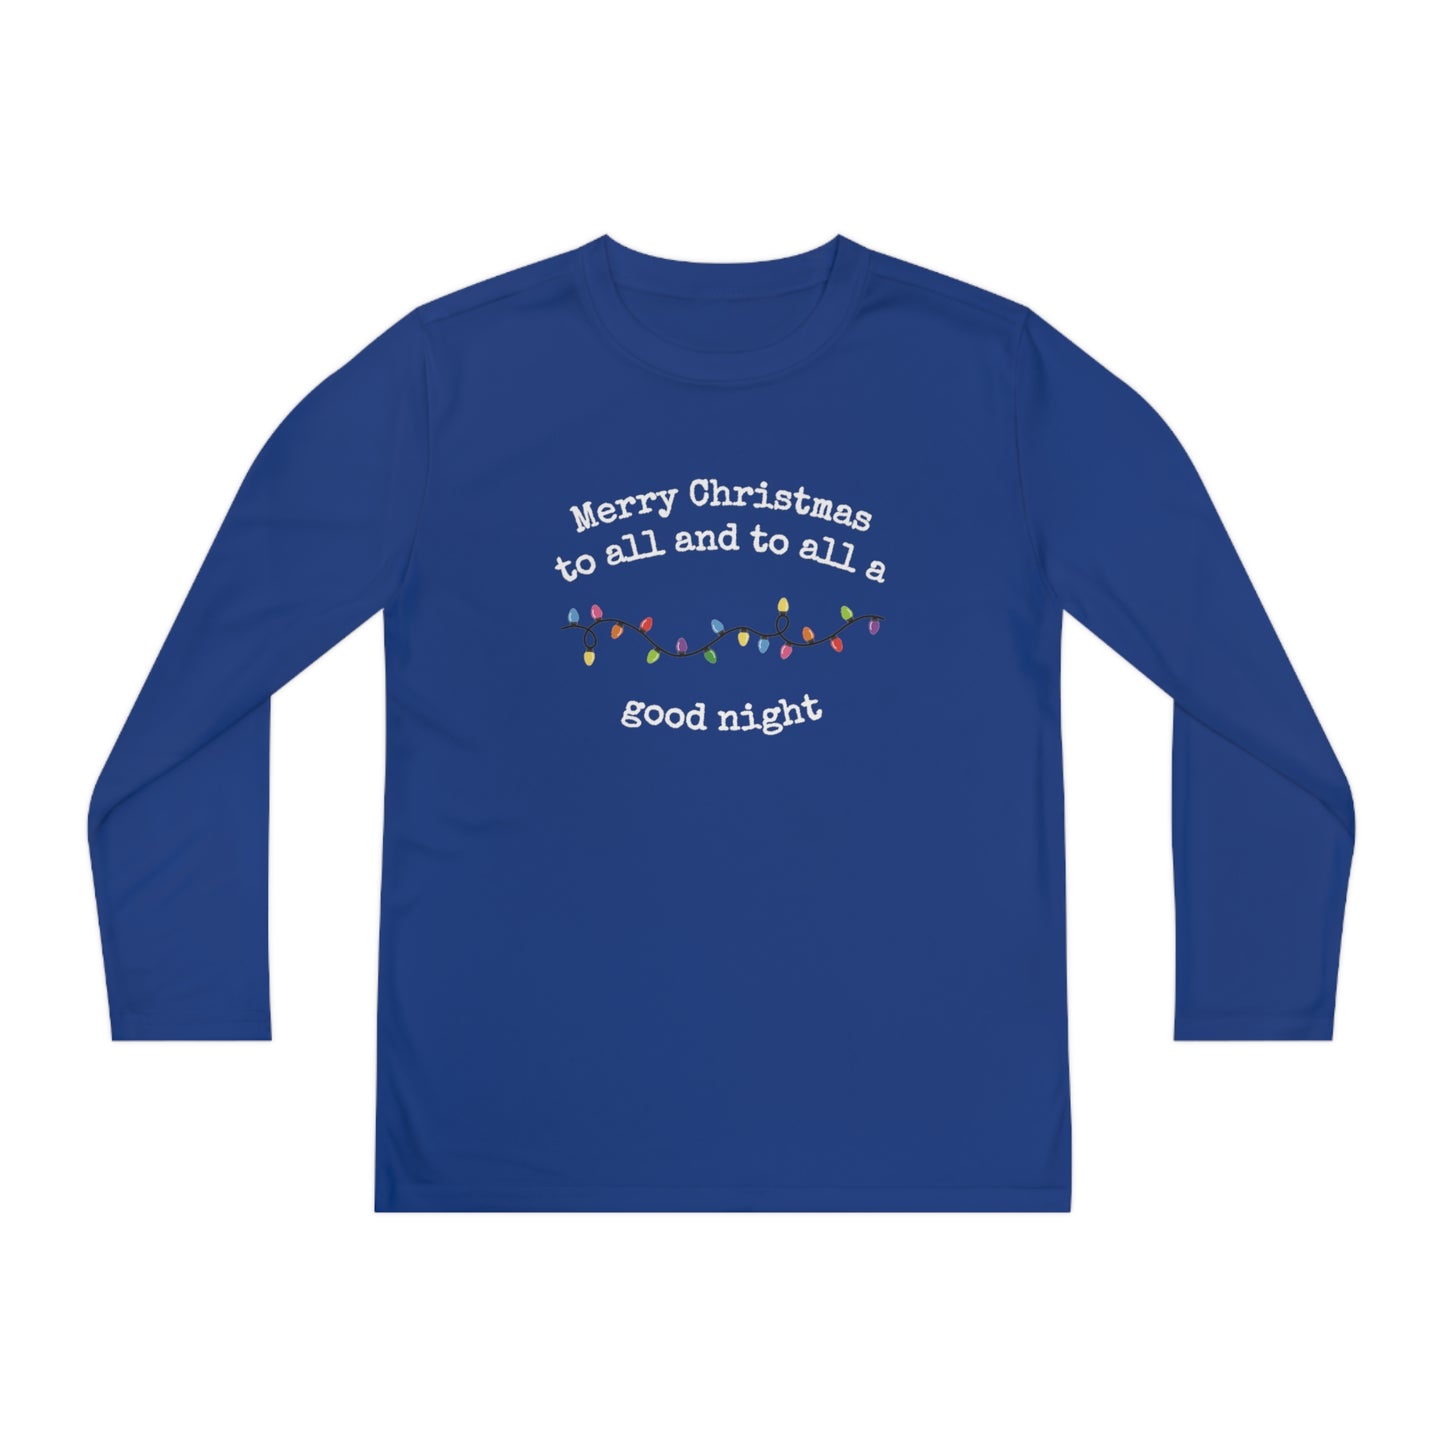 Youth Long Sleeve Competitor Tee, "Merry Christmas to all and to all a goodnight" Christmas Shirt, Family Christmas Shirt